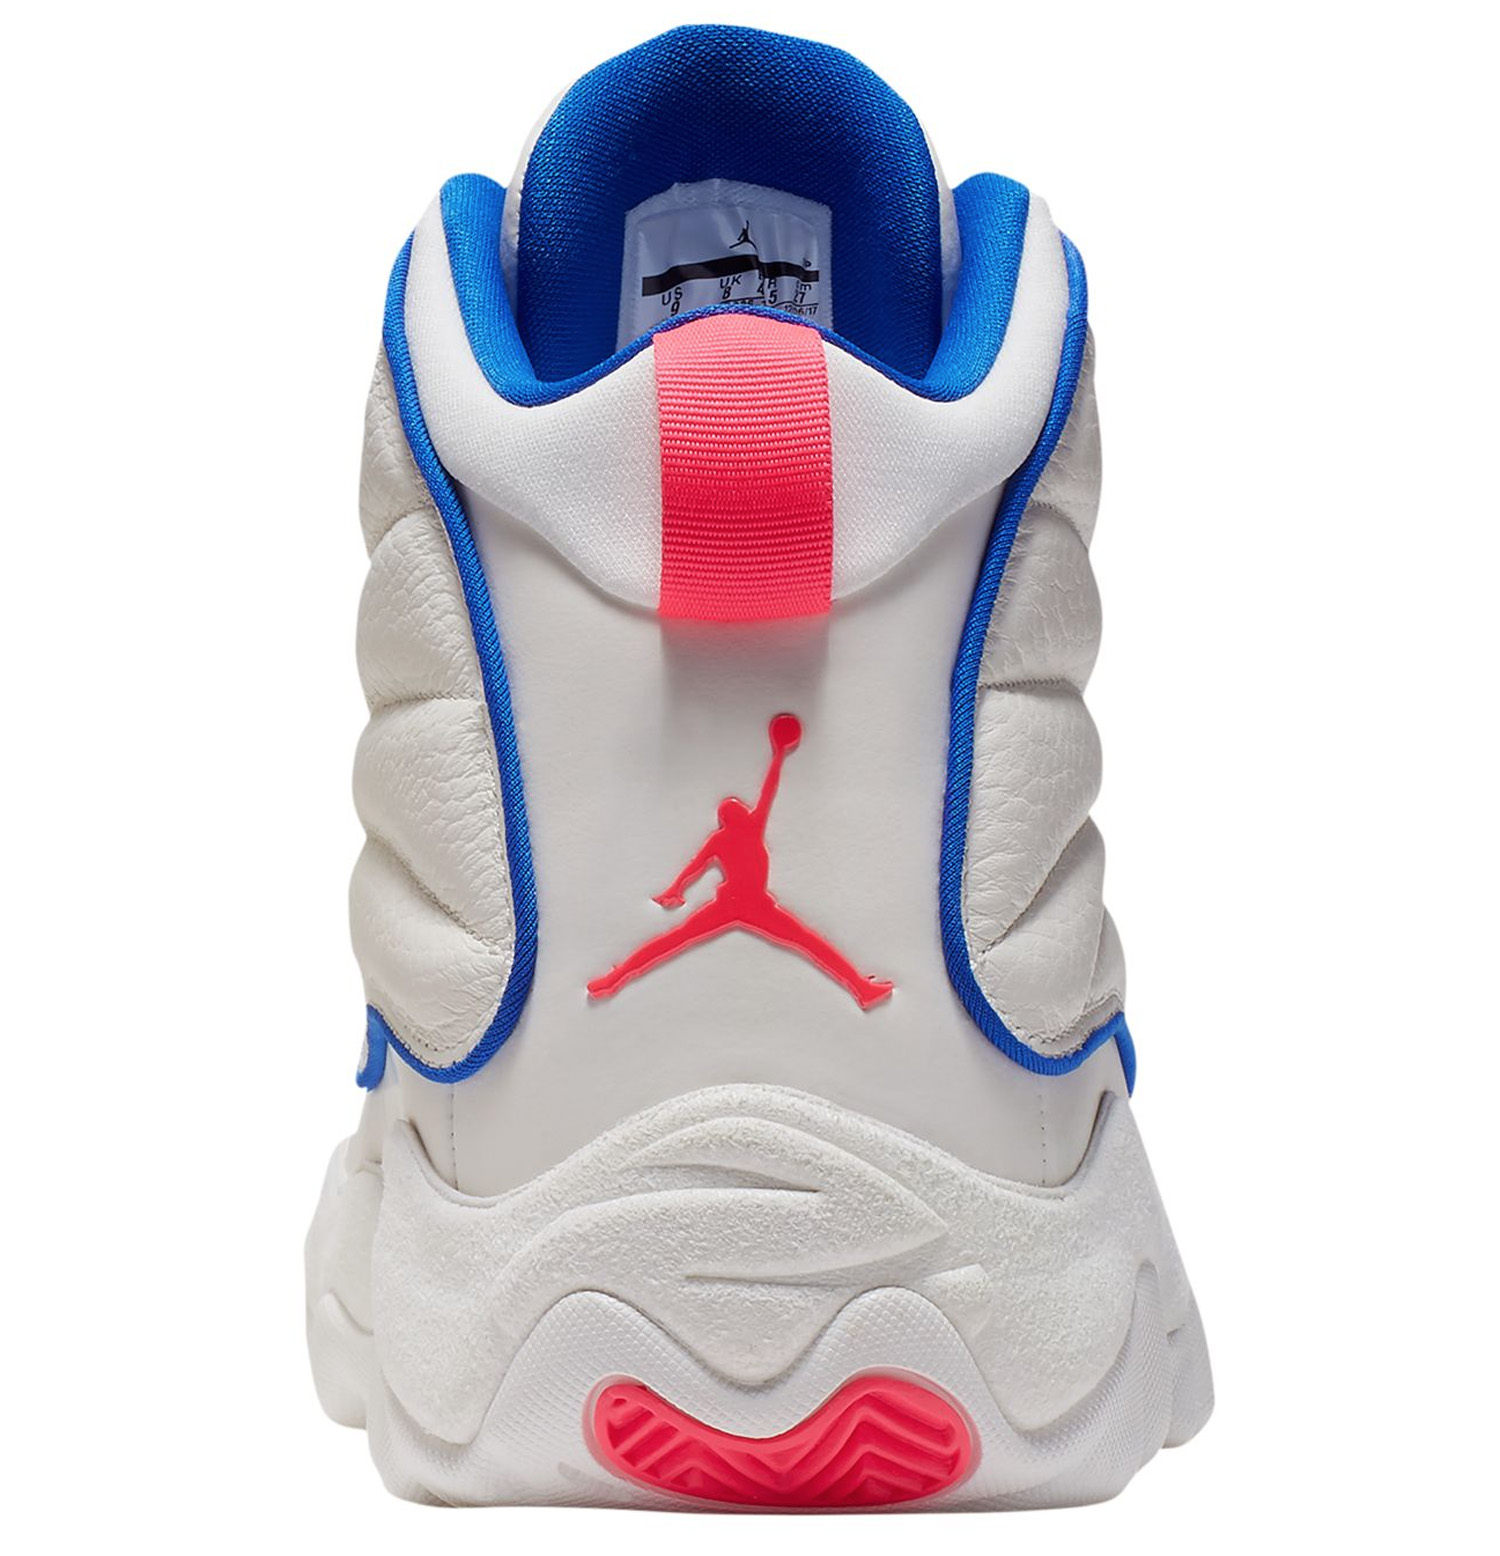 jordan pro strong pink and blue